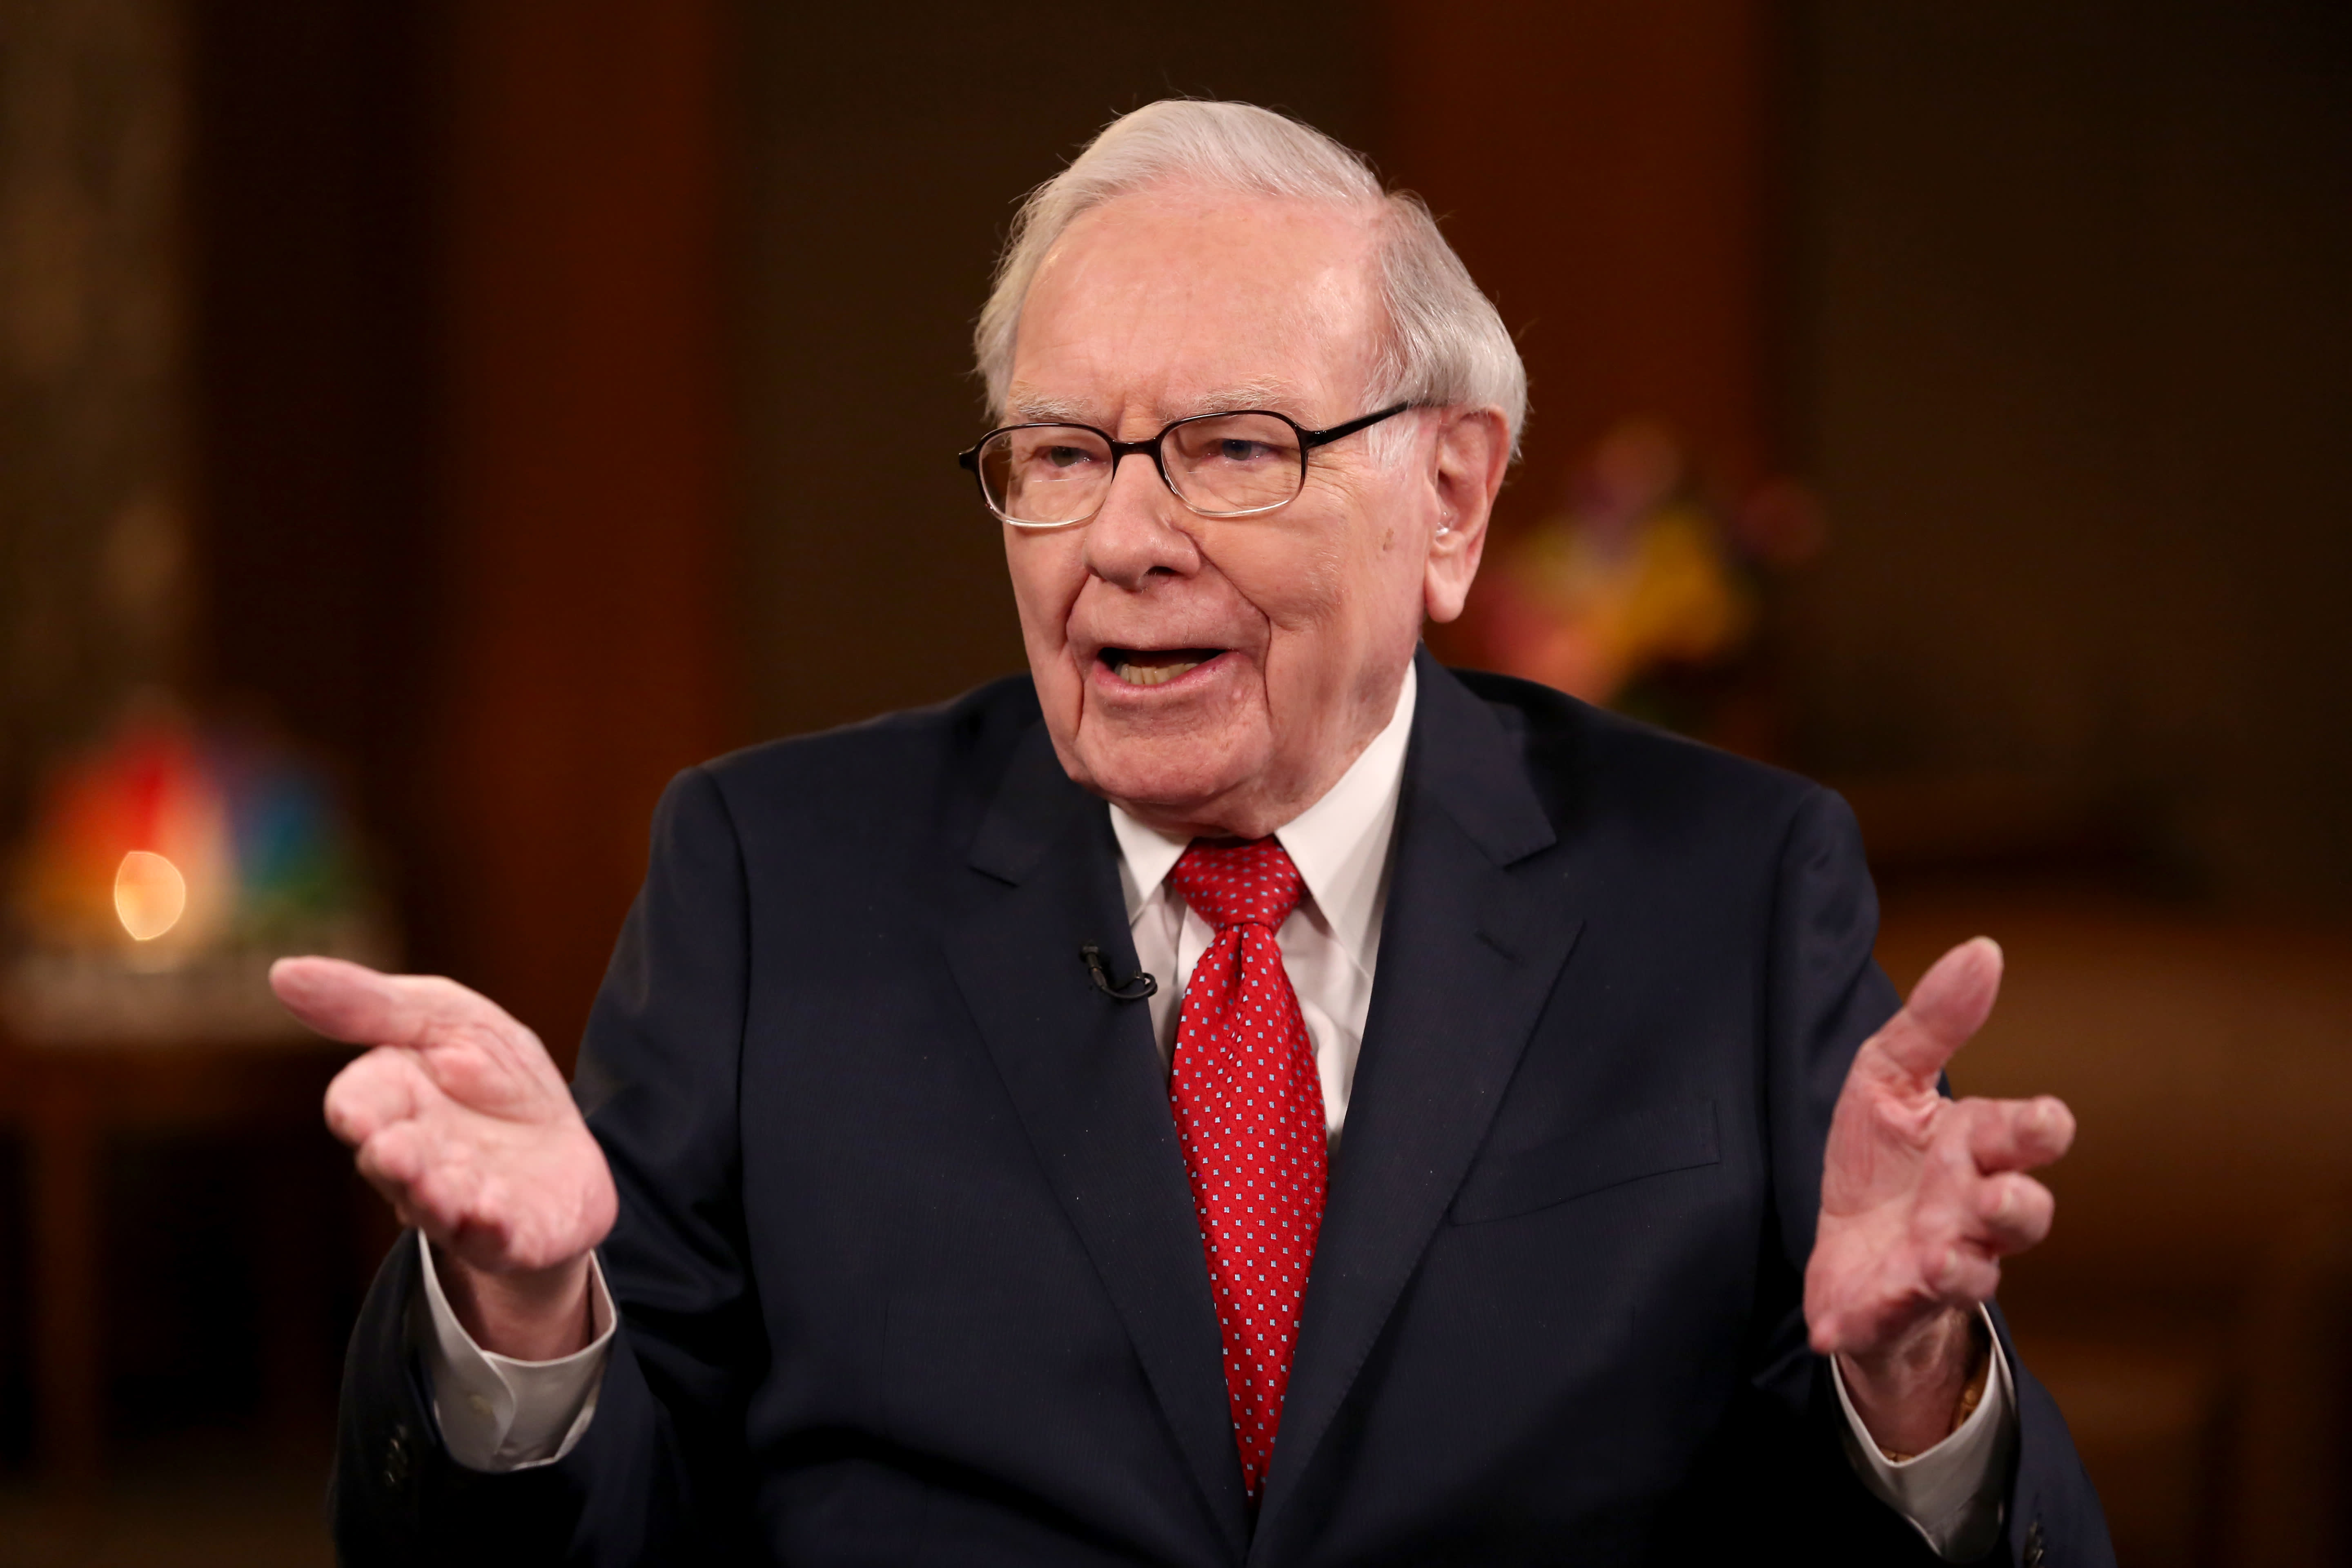 Berkshire Hathaway reports 40% surge in operating earnings and record cash pile